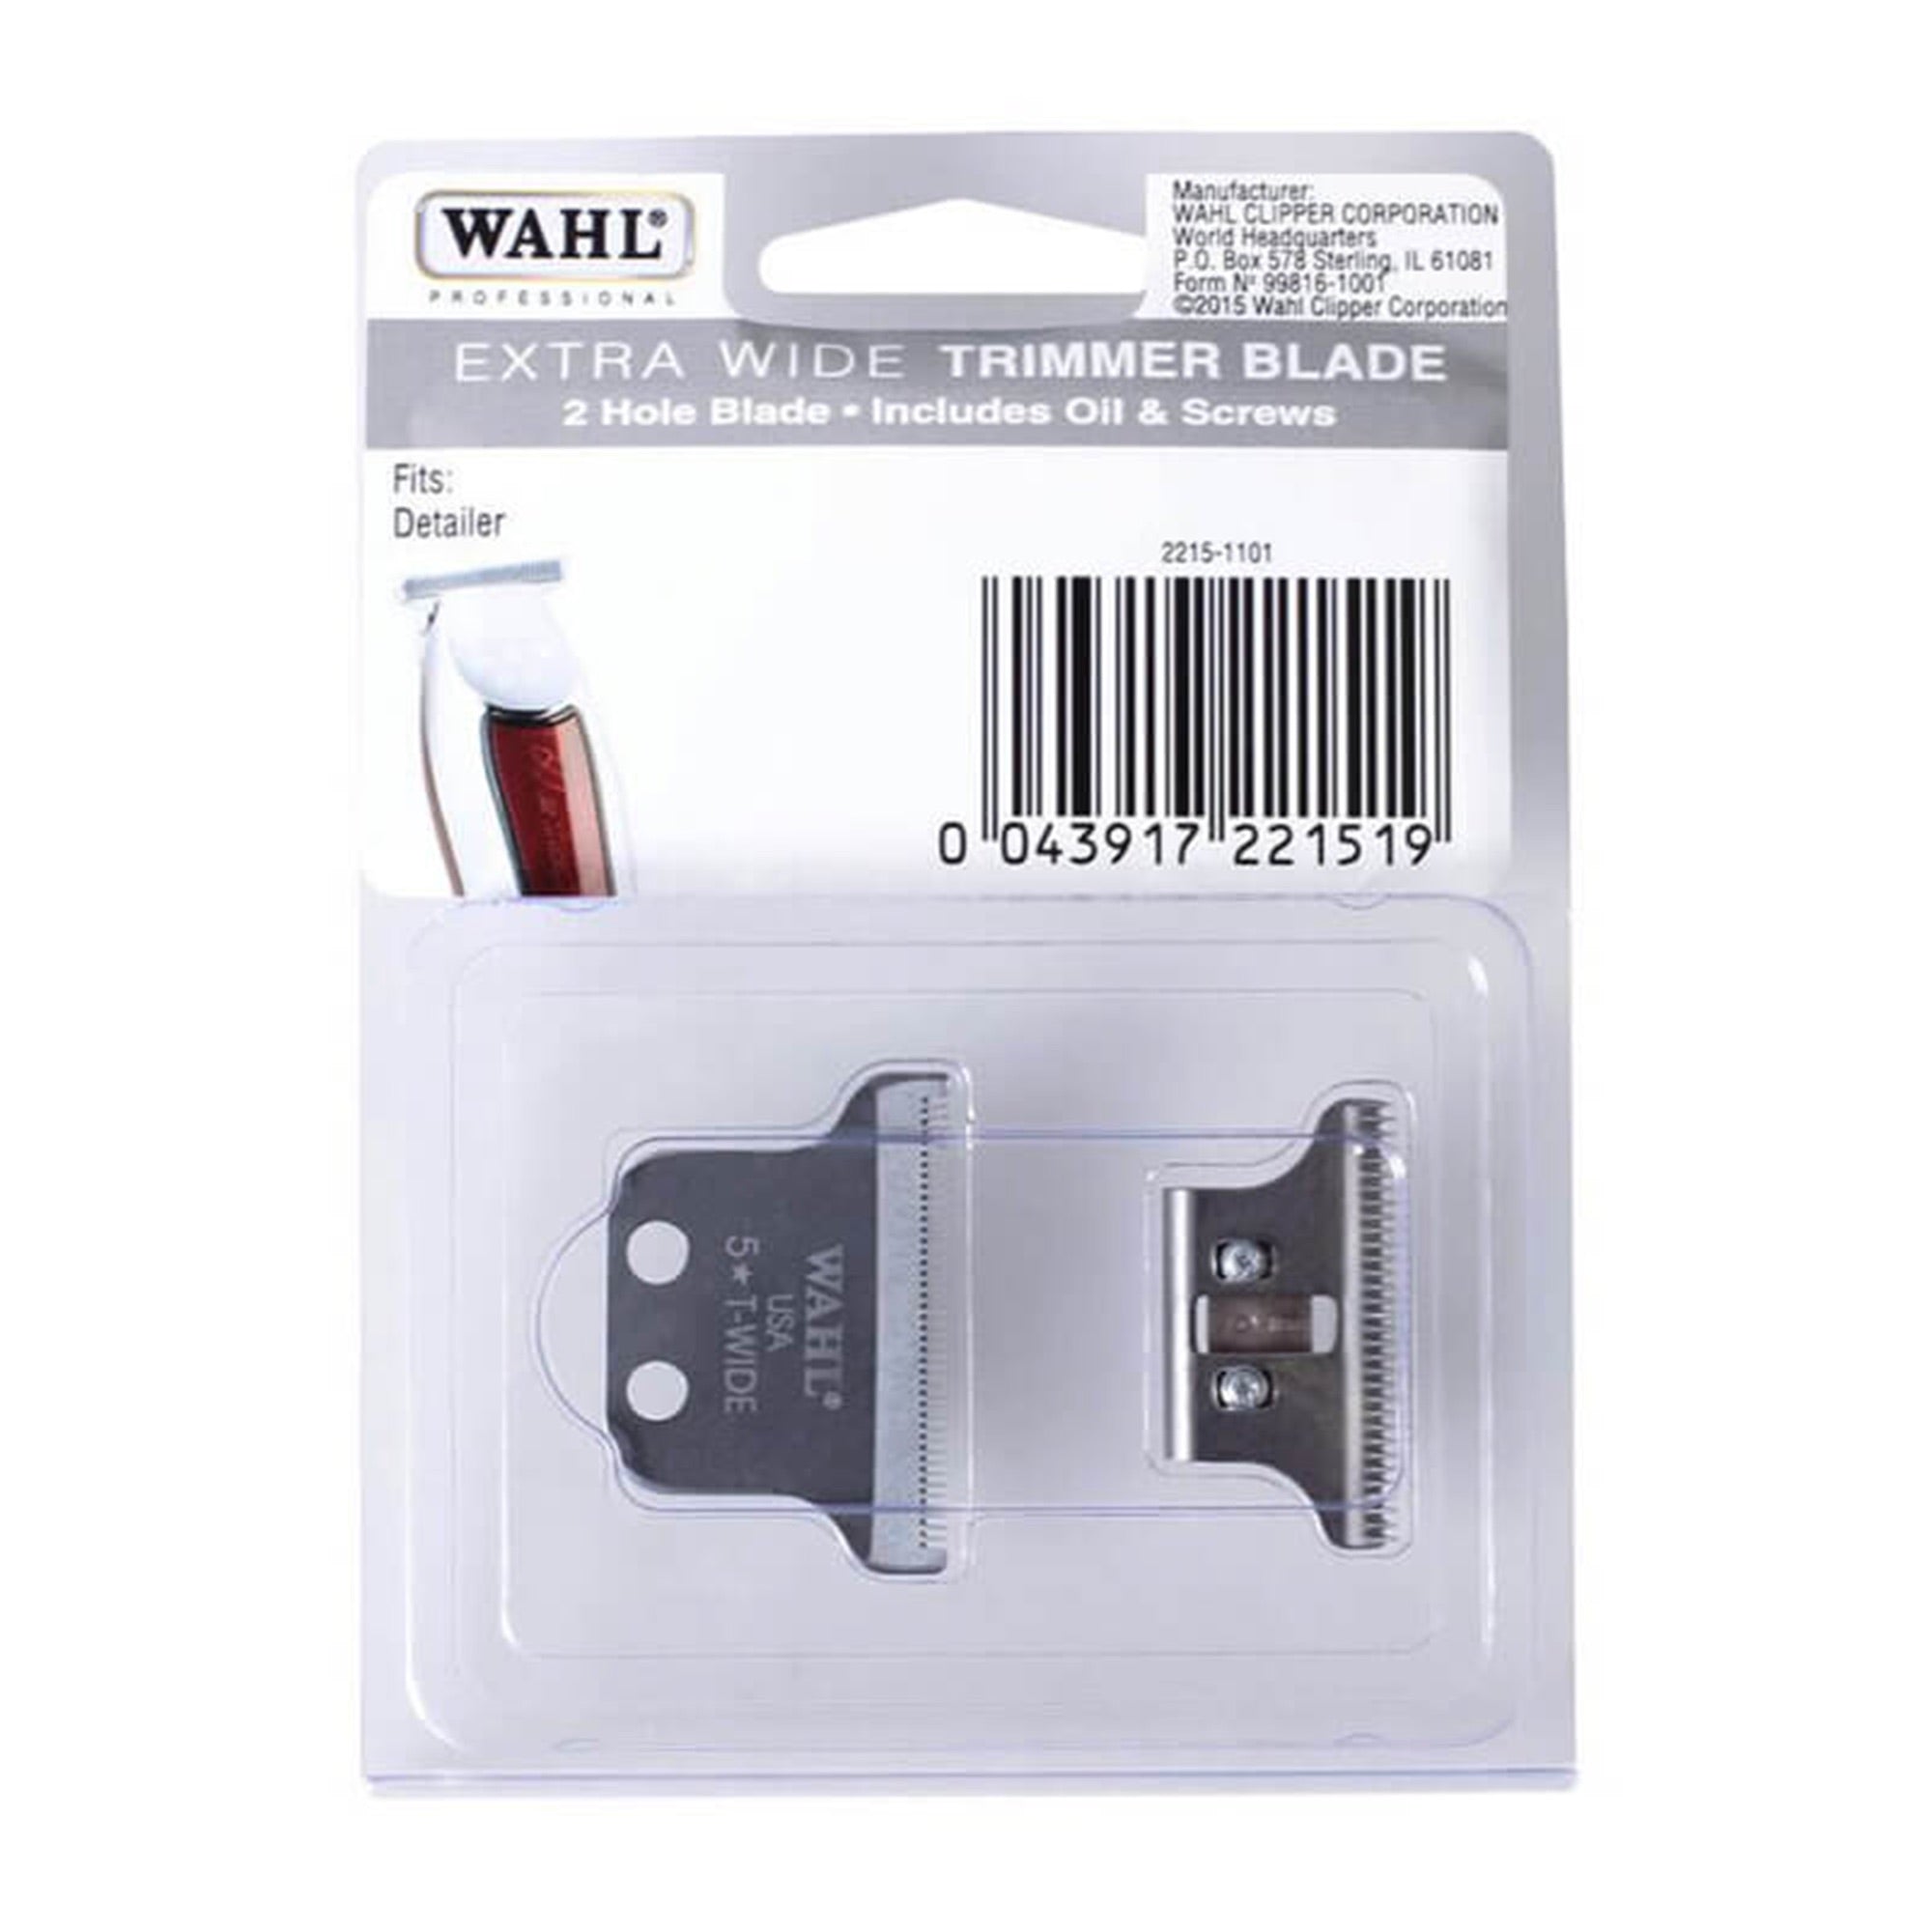 Wahl - 2 Hole Extra Wide Trimmer Blade 2215-1101